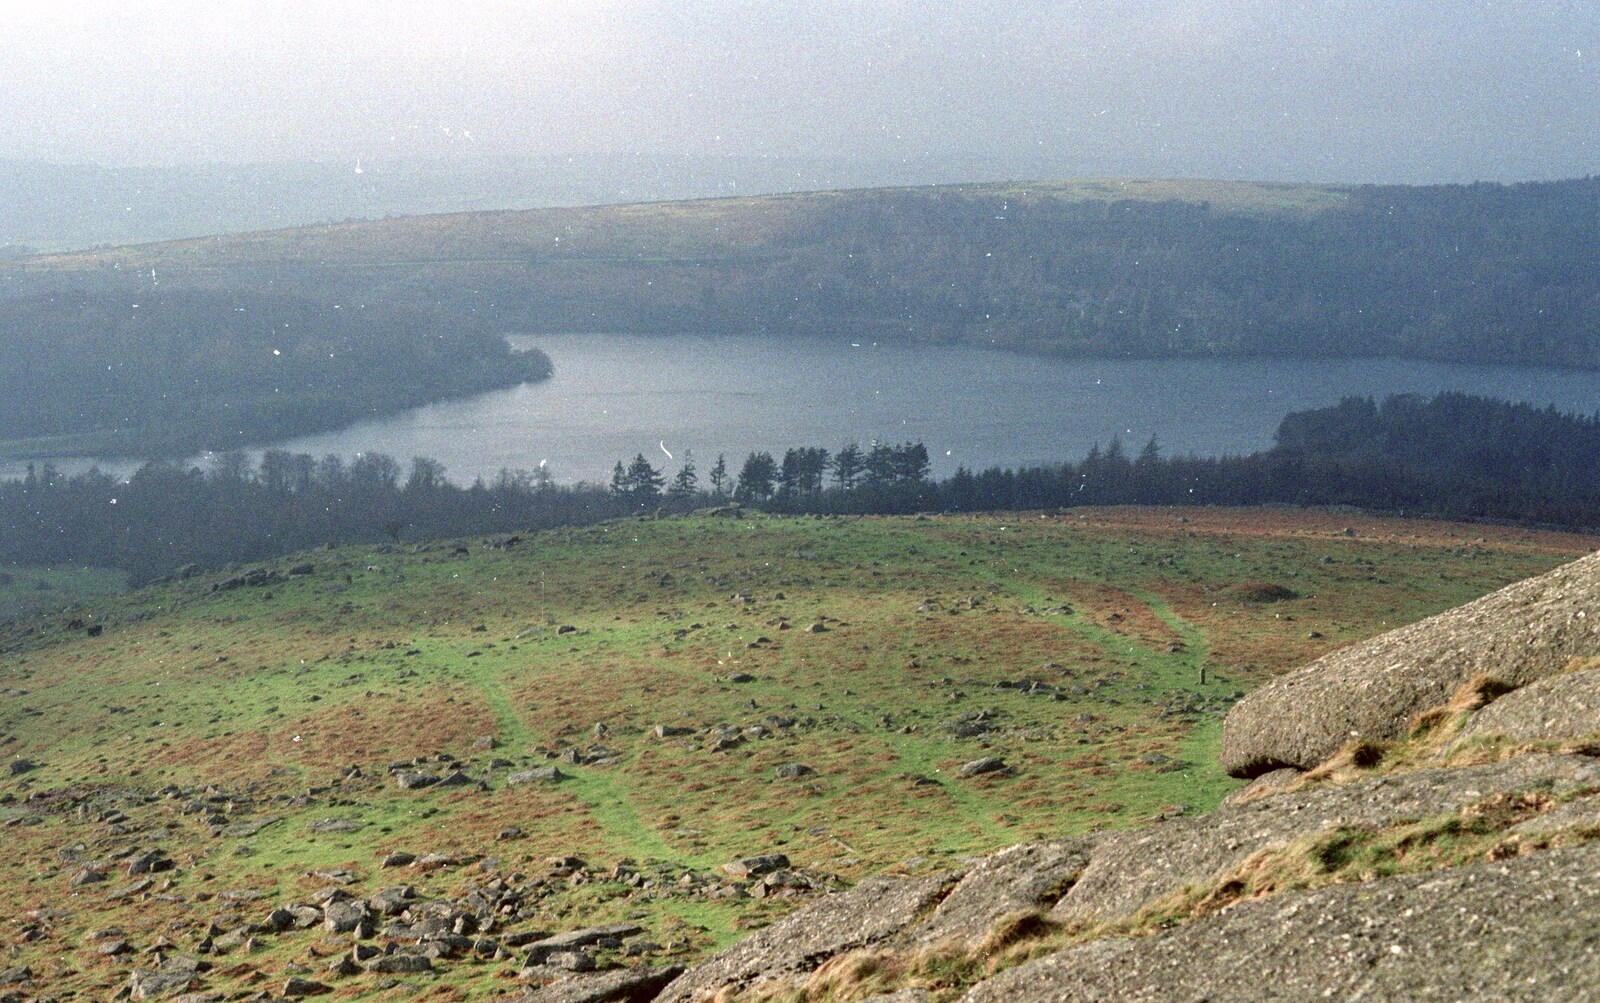 A Trip to Plymouth and Bristol, Avon and Devon - 18th February 1990: The view from the top of Burrator